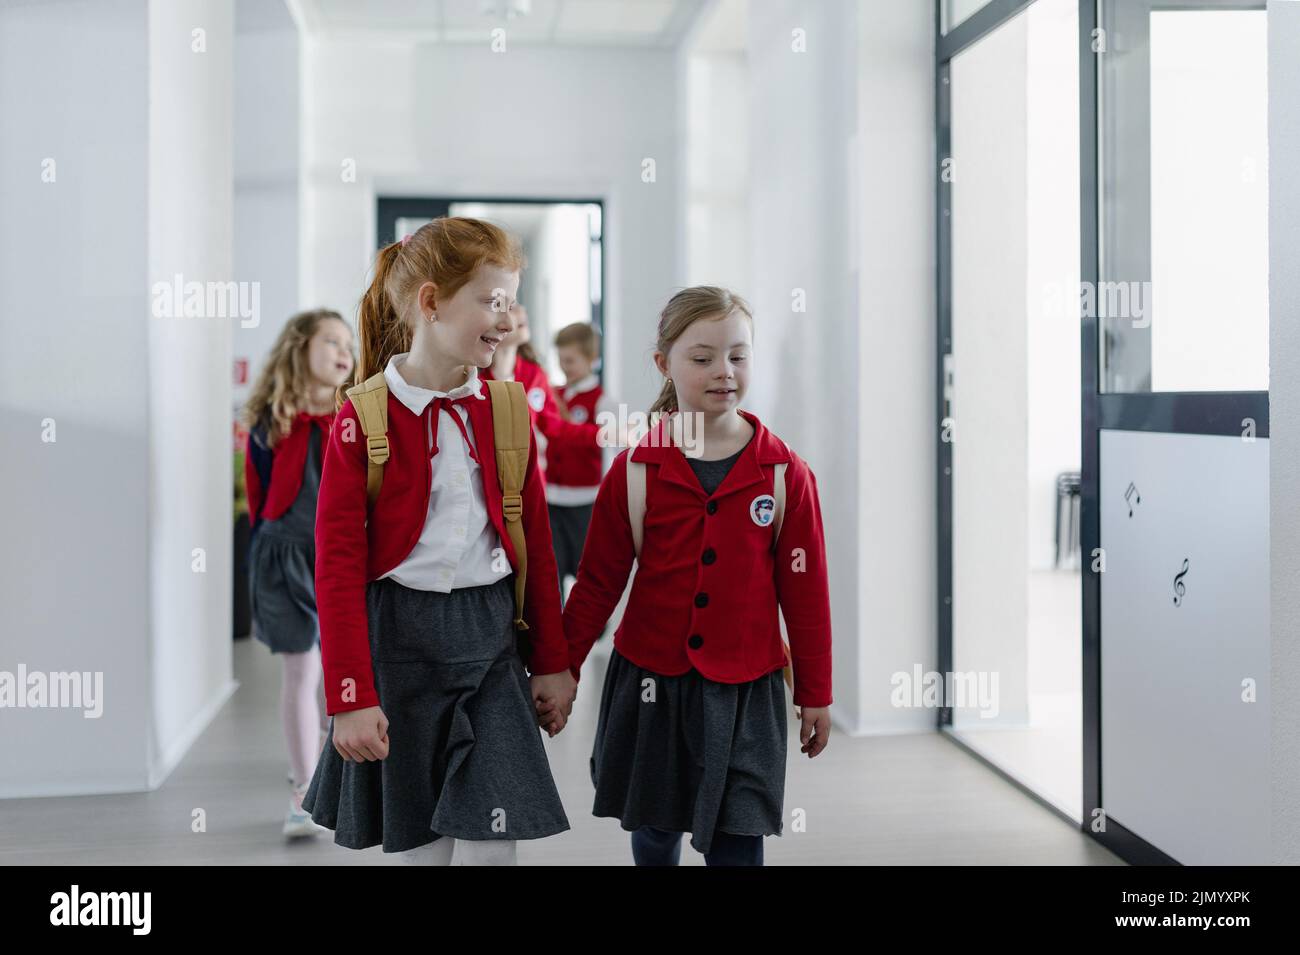 Happy schoolgrirl with Down syndrome in uniform walking in school corridor with her classmate, holding each other hands. Stock Photo